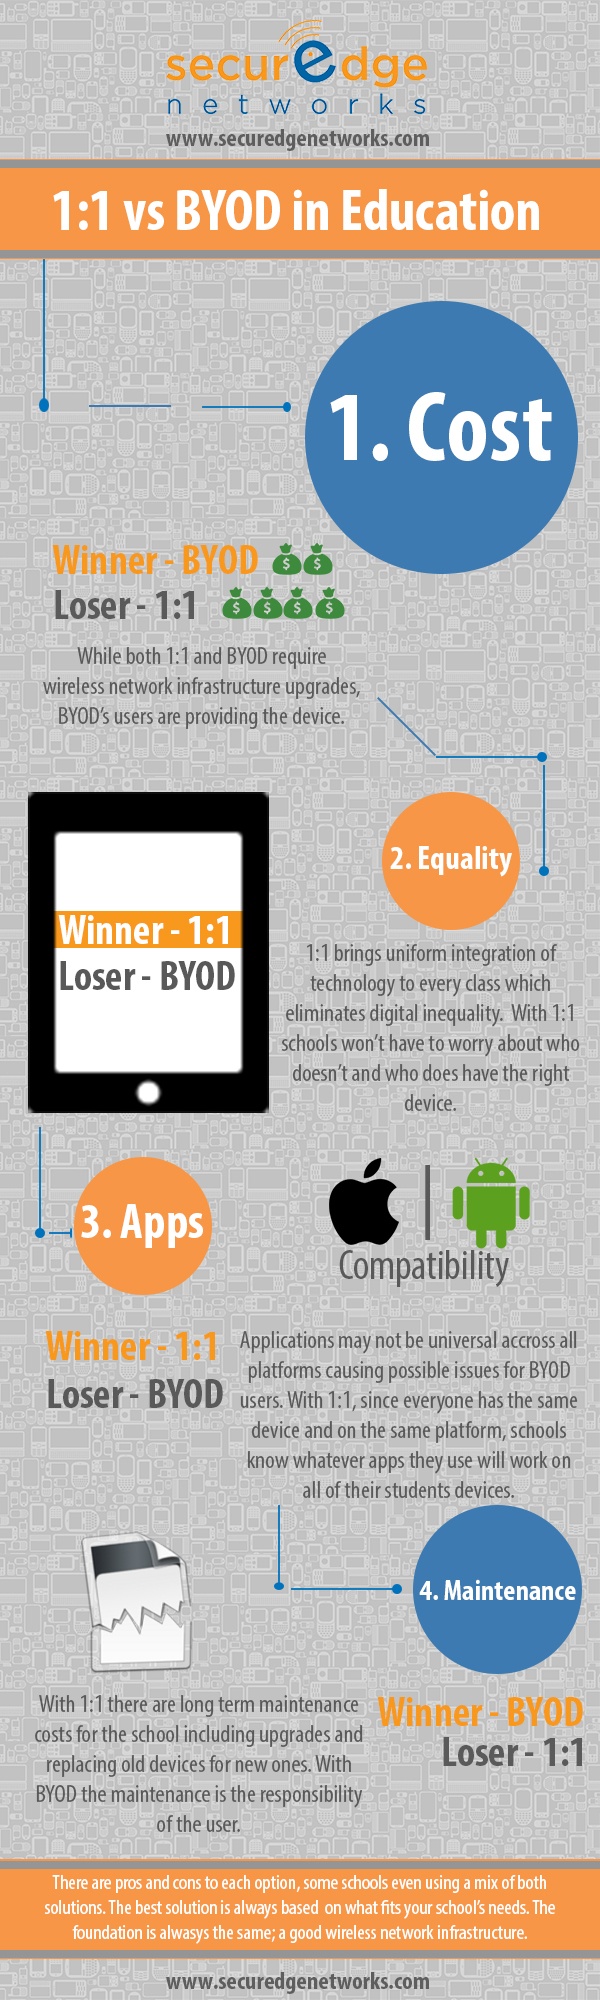 1:1 vs BYOD in Education Infographic